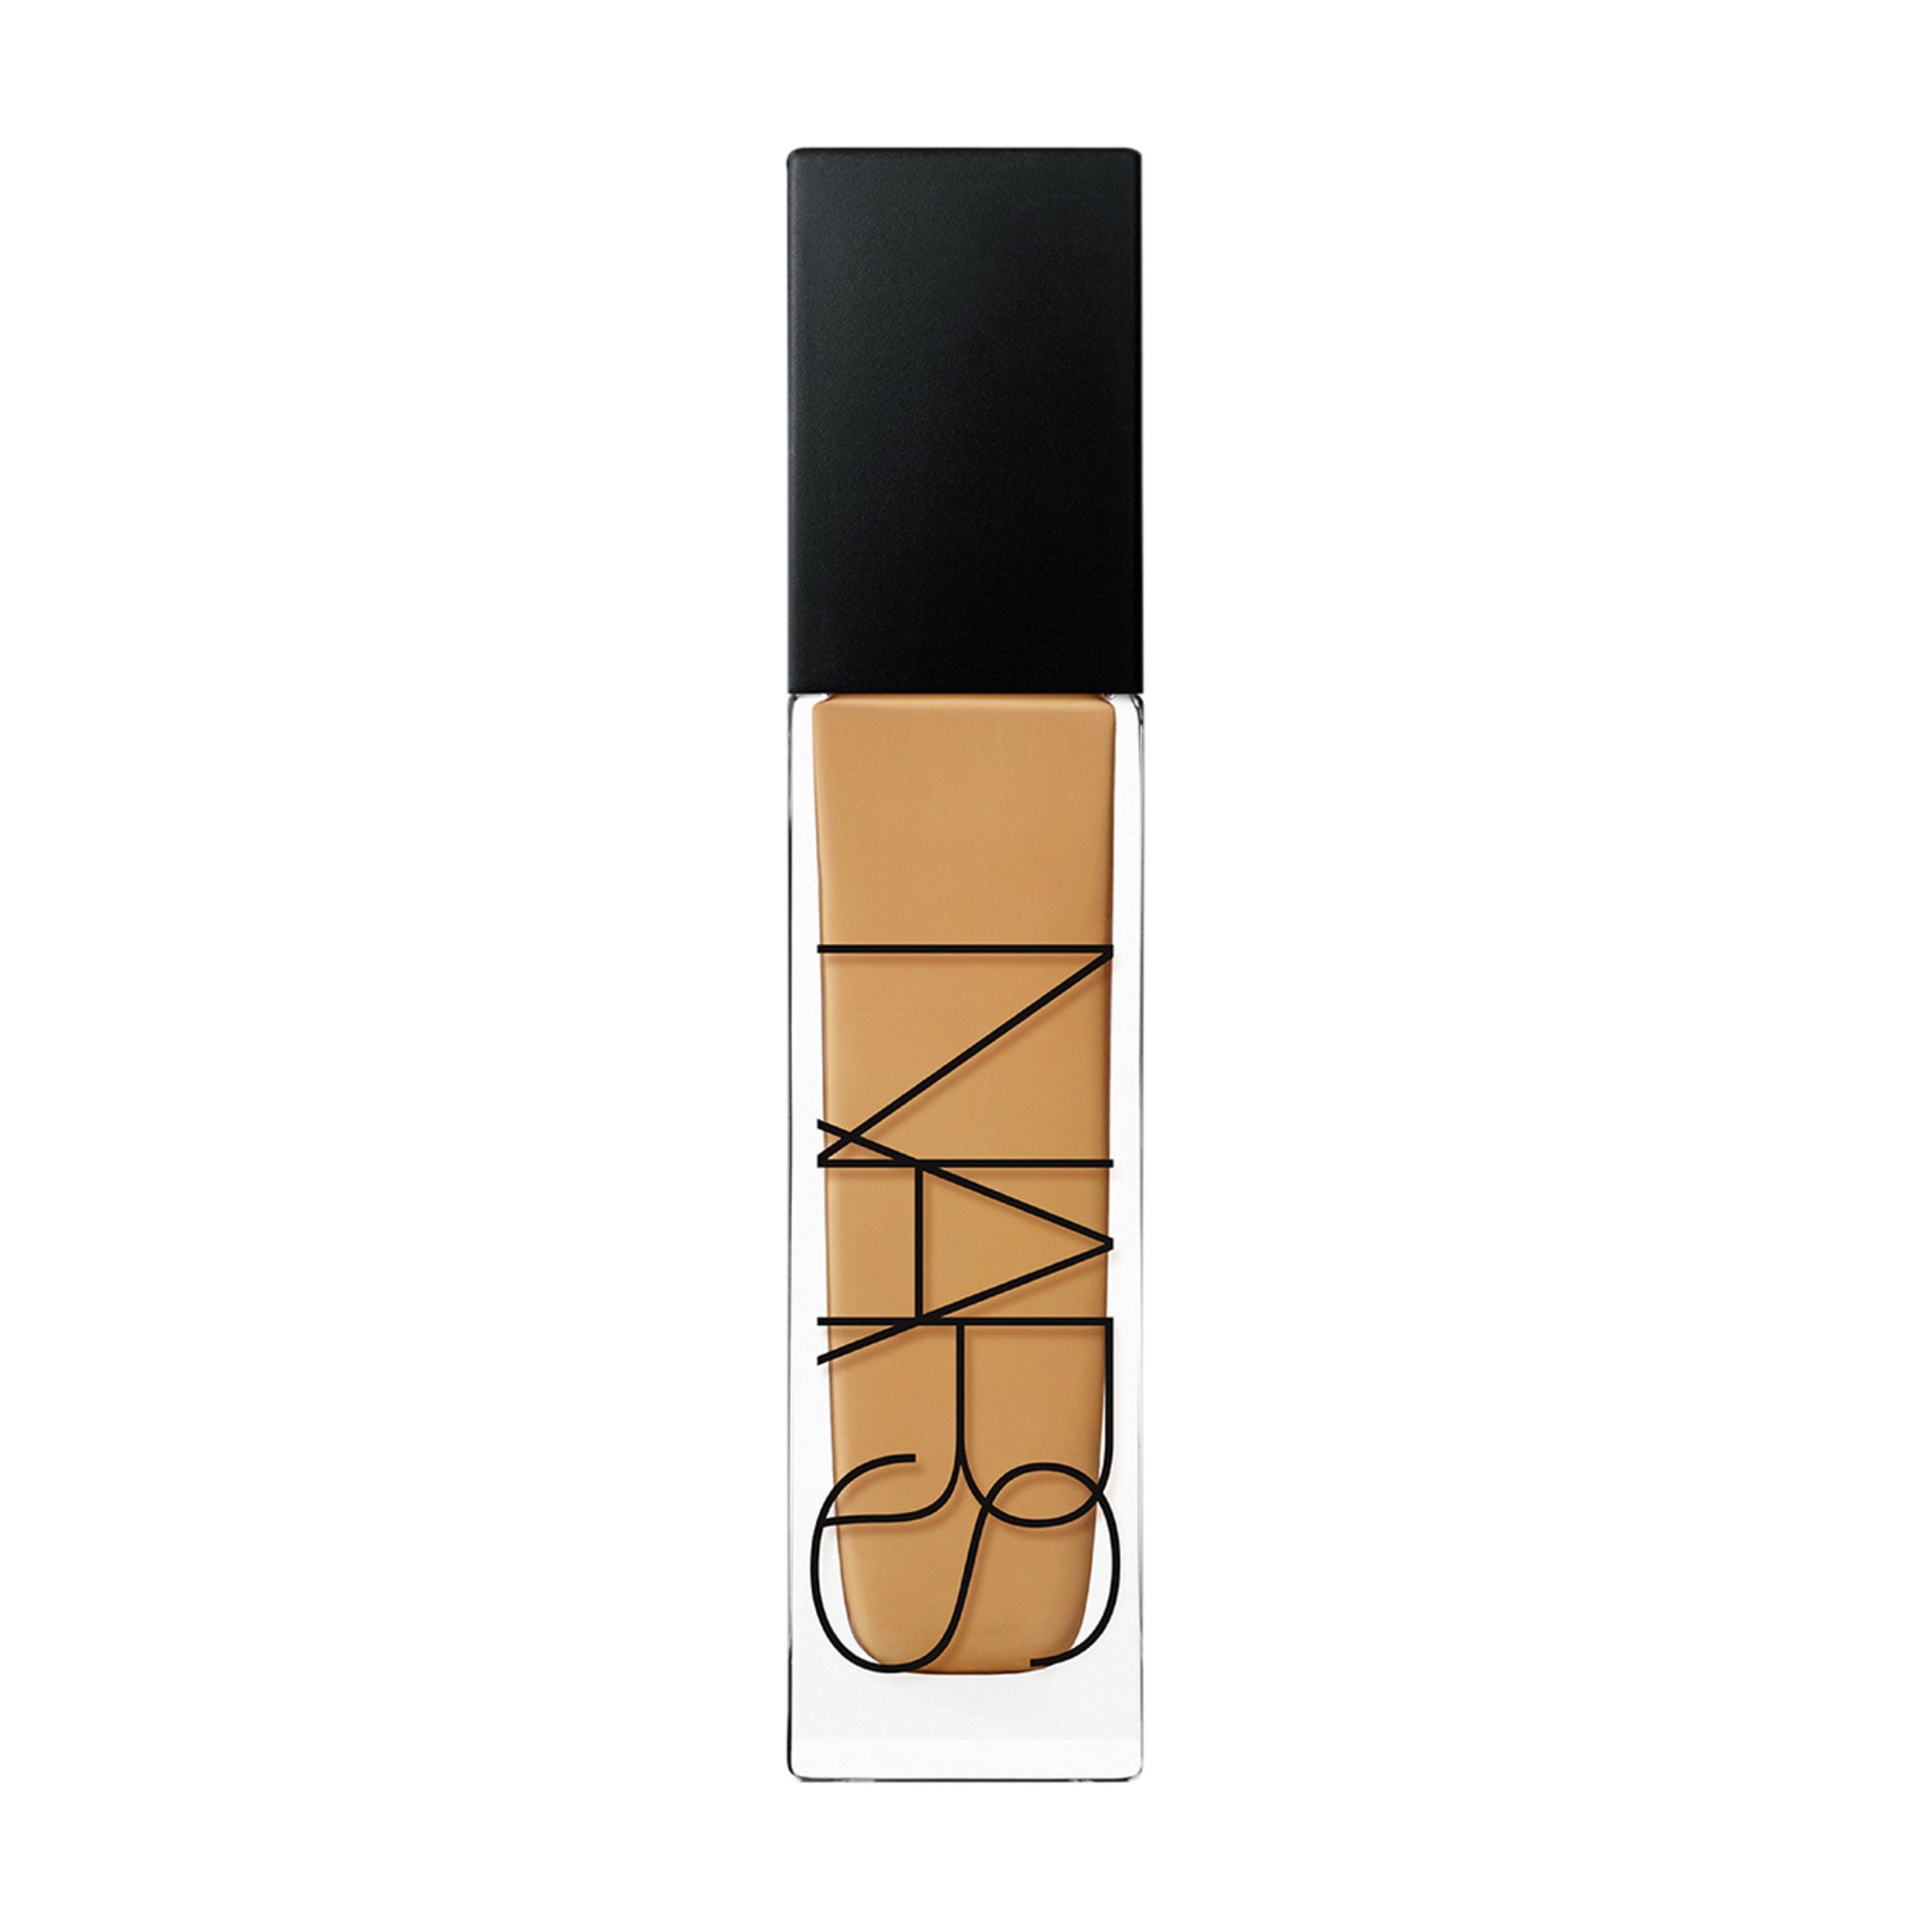 Nars Natural Radiant Longwear Foundation Color/Shade variant: Moorea MD2.3 main image. This product is for deep warm complexions